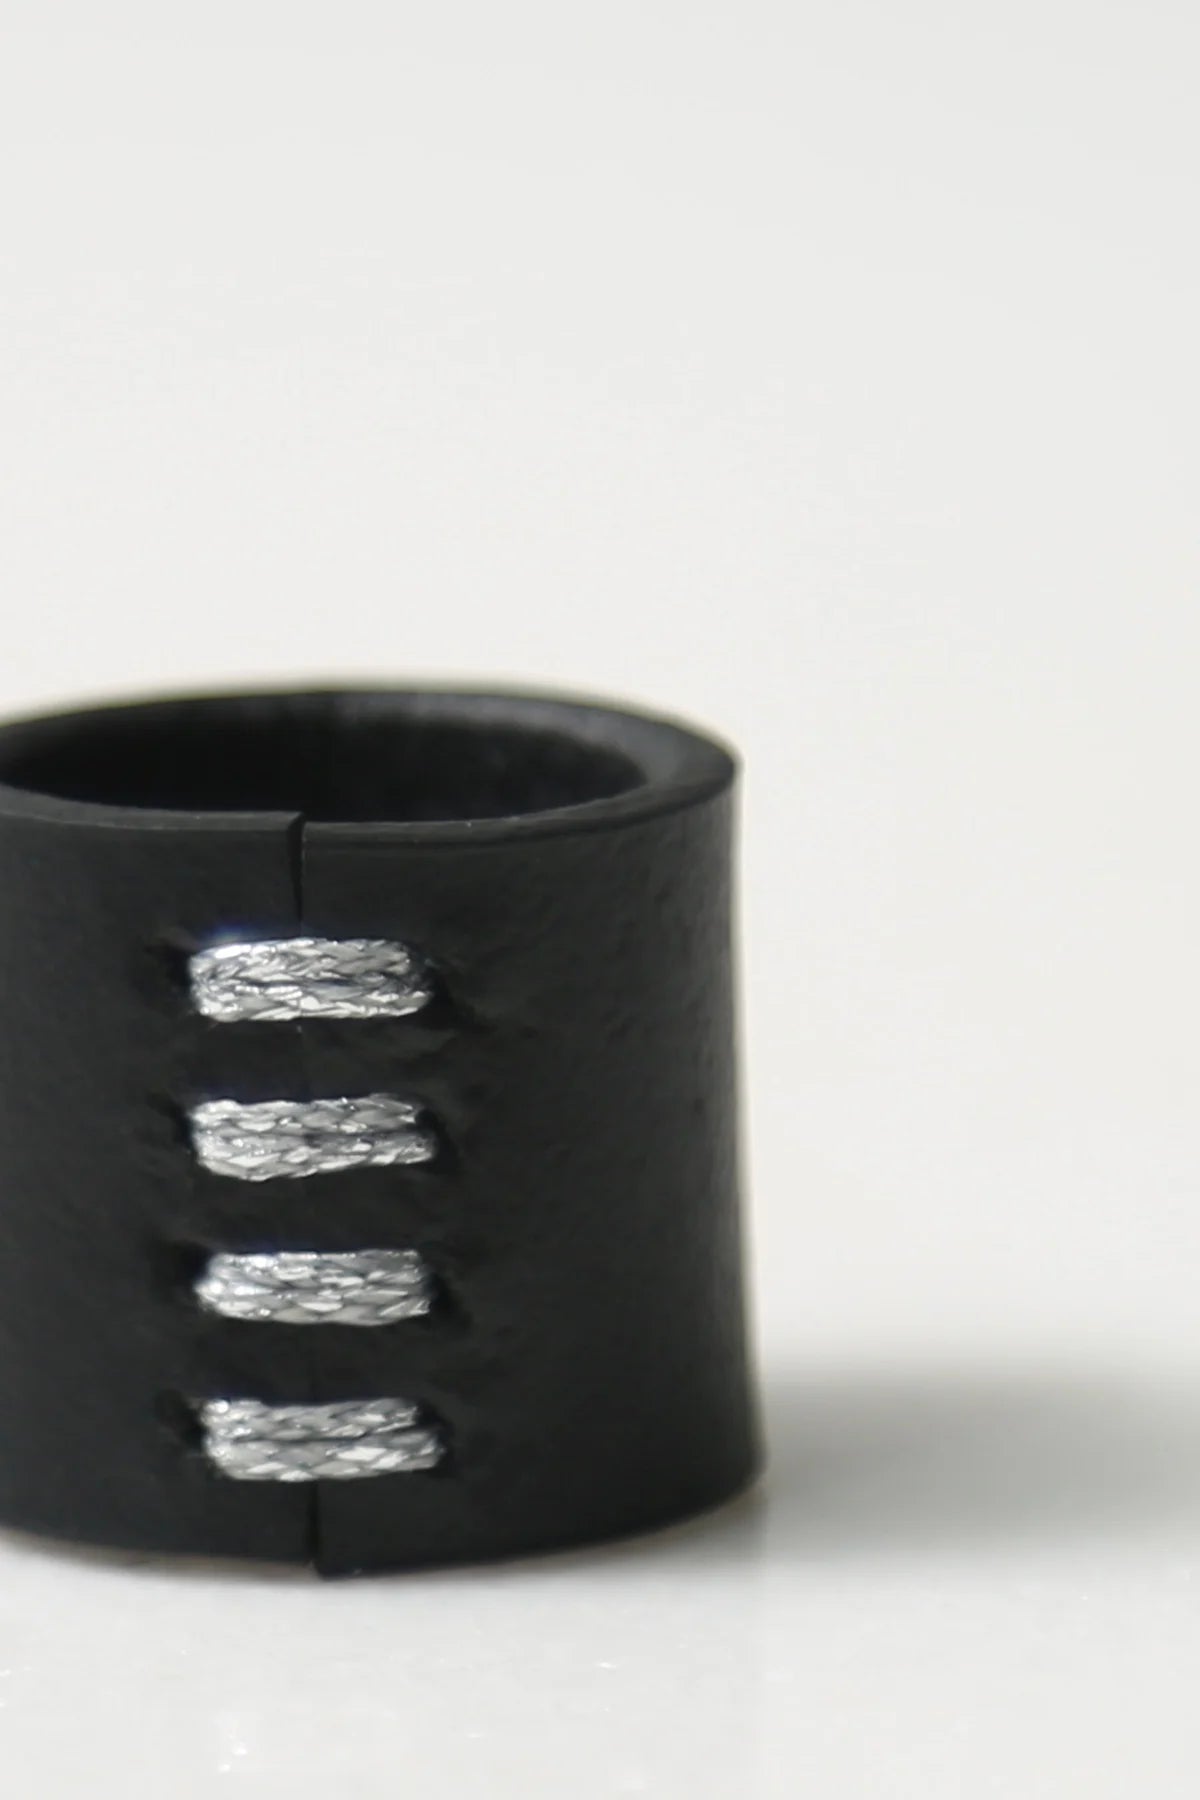 【Aumorfia】 SILVER STITCHED LEATHER RING